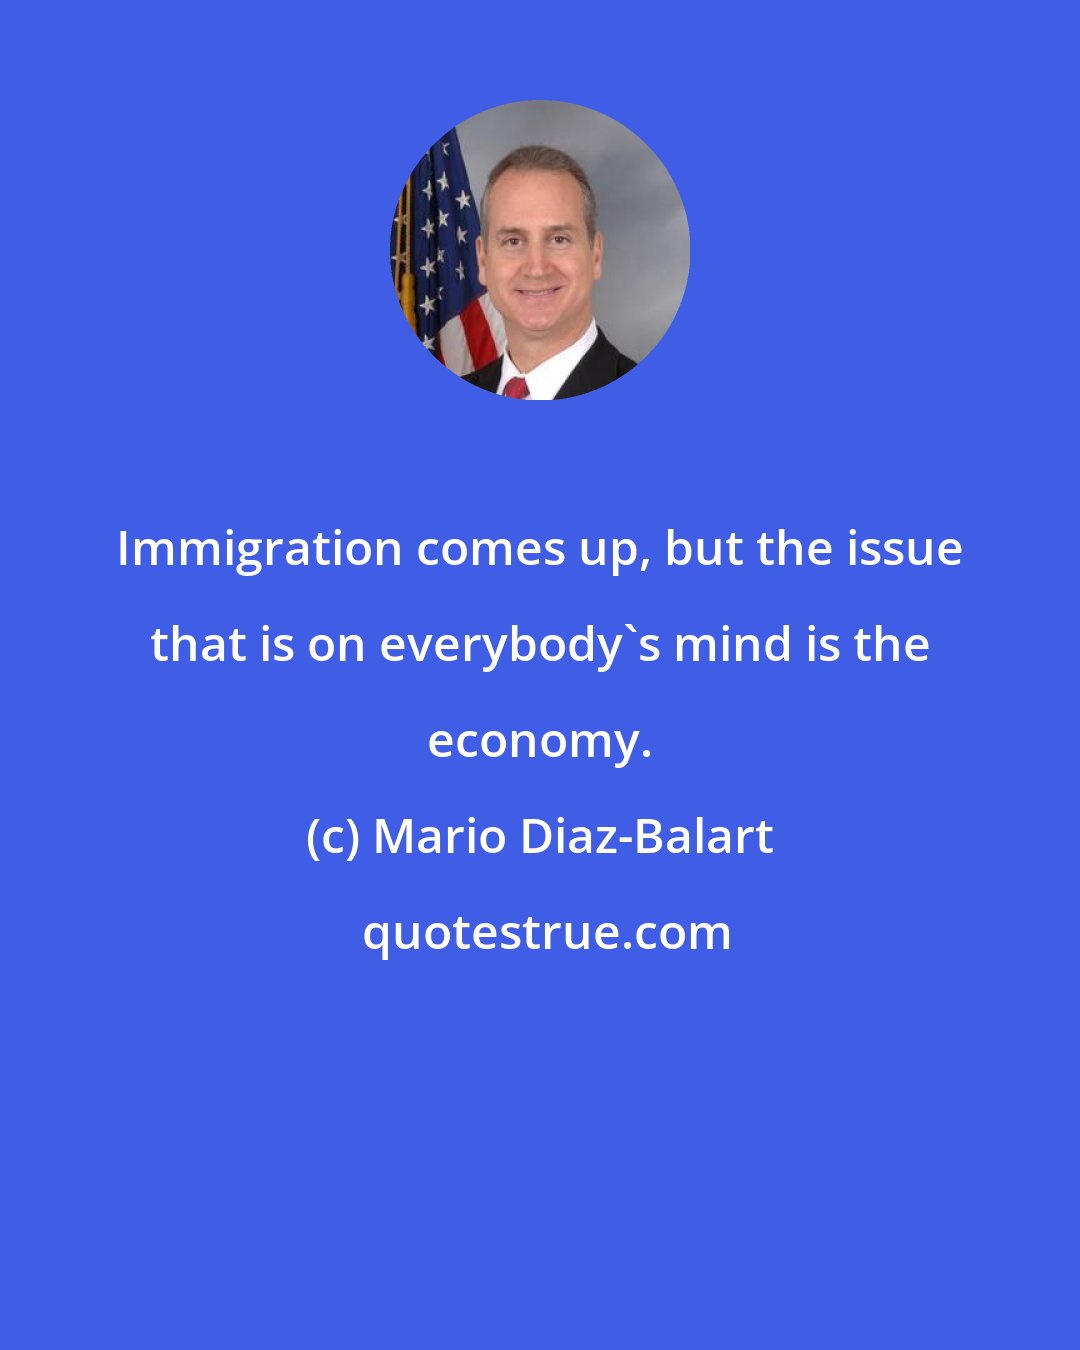 Mario Diaz-Balart: Immigration comes up, but the issue that is on everybody's mind is the economy.